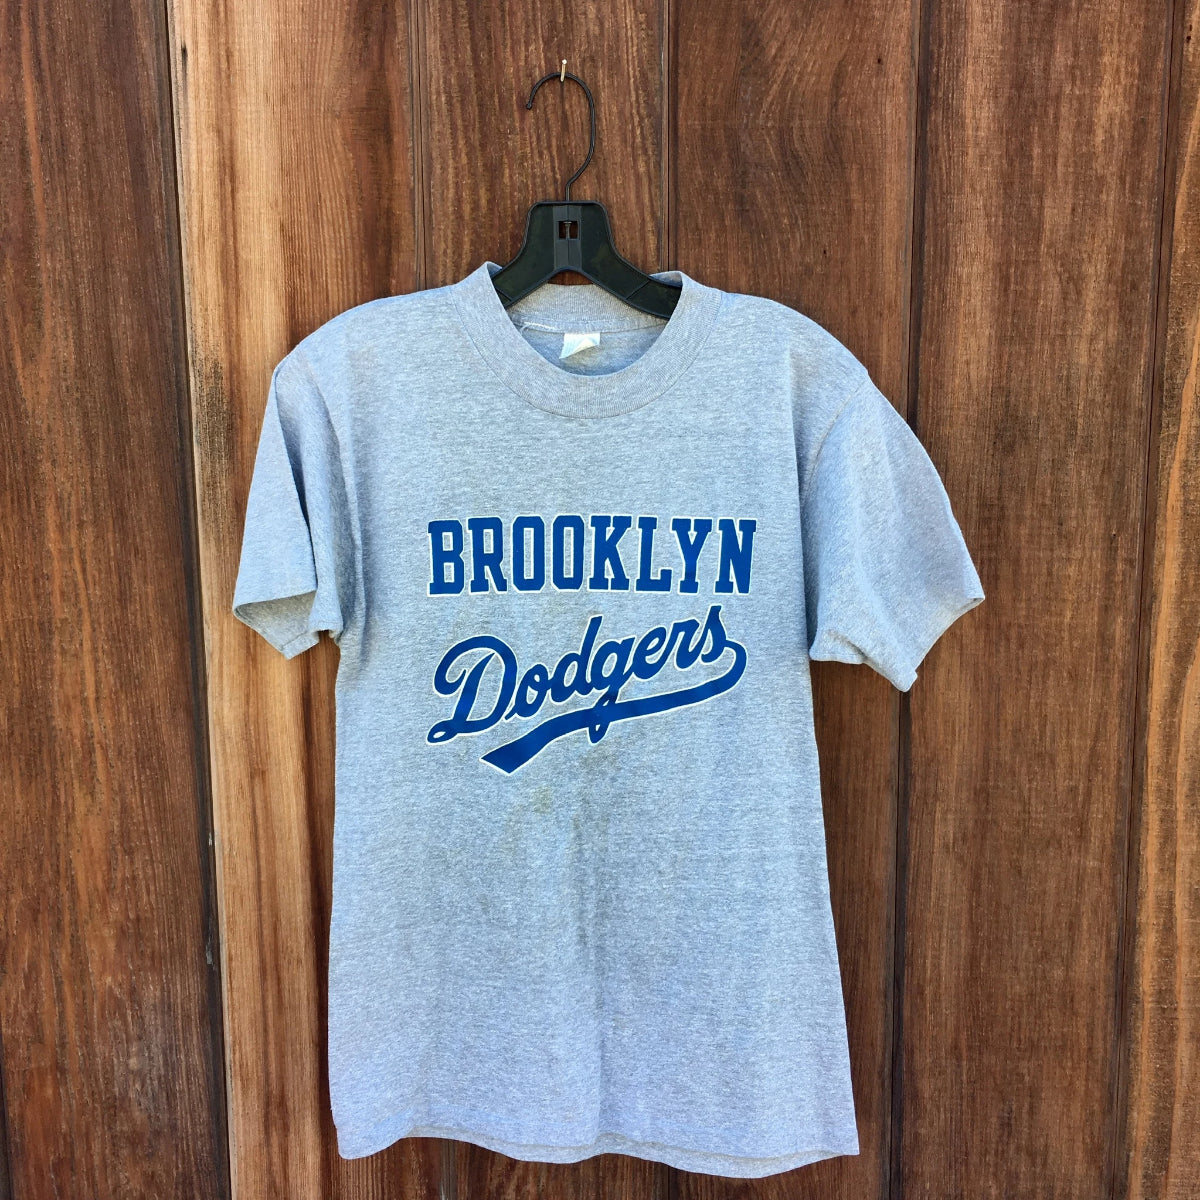 Brooklyn Dodgers T-Shirts for Sale